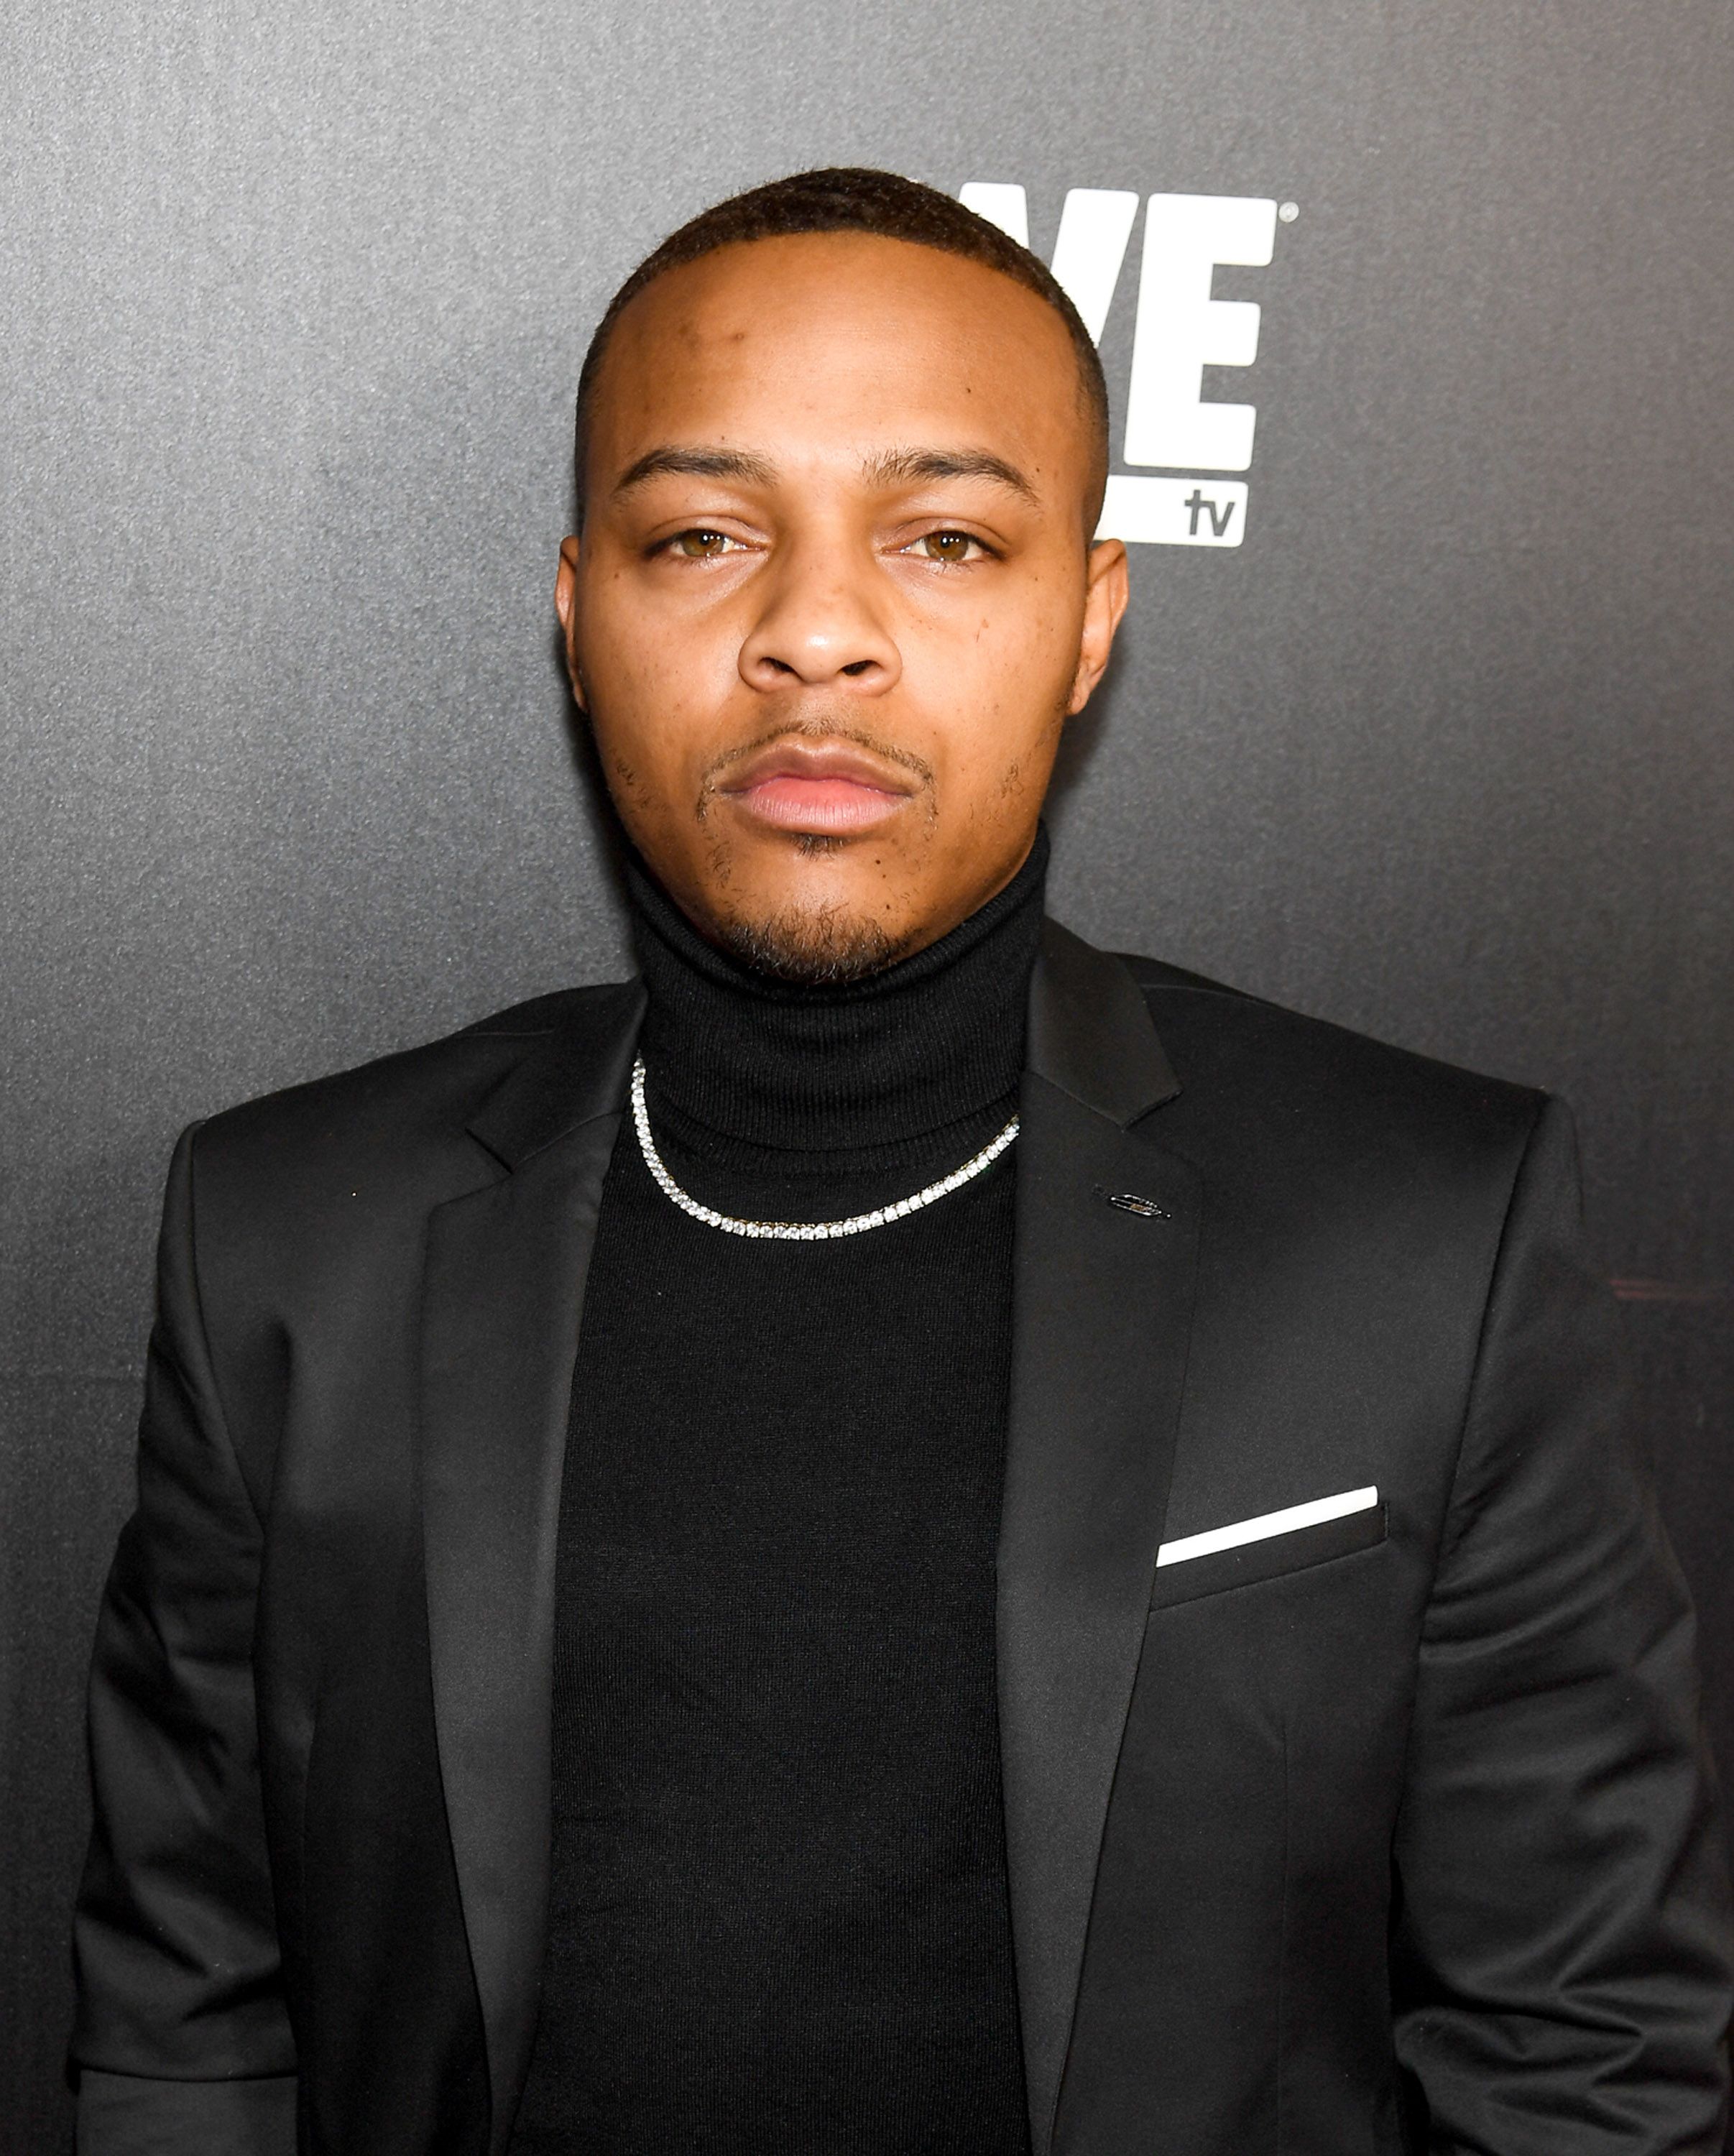 Bow Wow at Woodruff Arts Center on January 9, 2018 in Atlanta, Georgia. | Photo: Getty Images